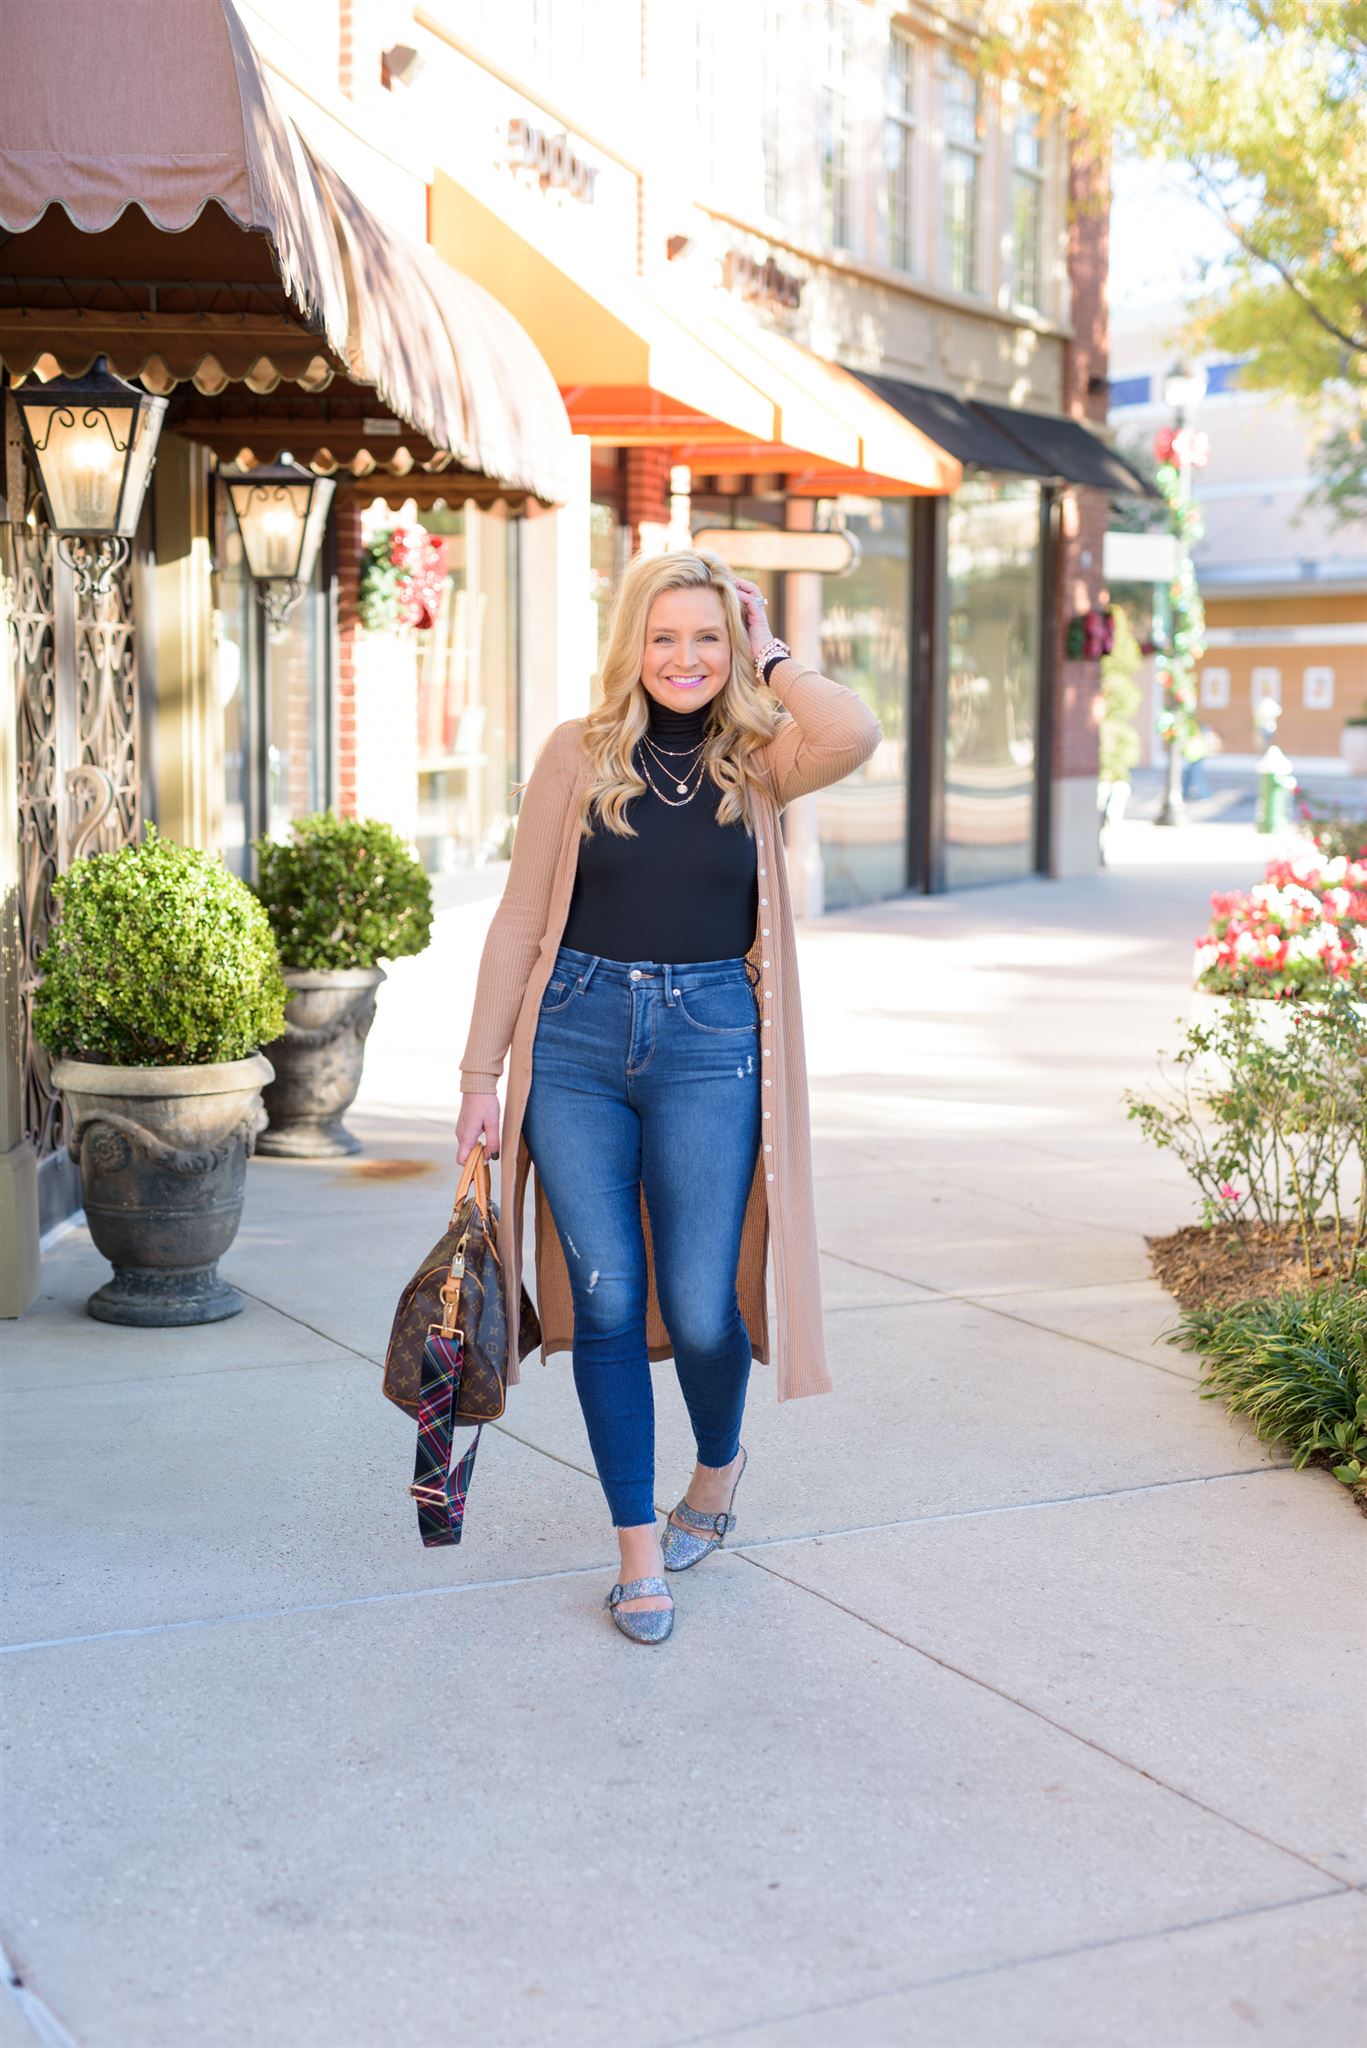 December Outfits by popular Houston fashion blog, Fancy Ashley: image of a woman standing outside and wearing a black turtleneck shirt, tan long line cardigan, jeans, and sliver slide flats while holding a Louis Vuitton bag.  